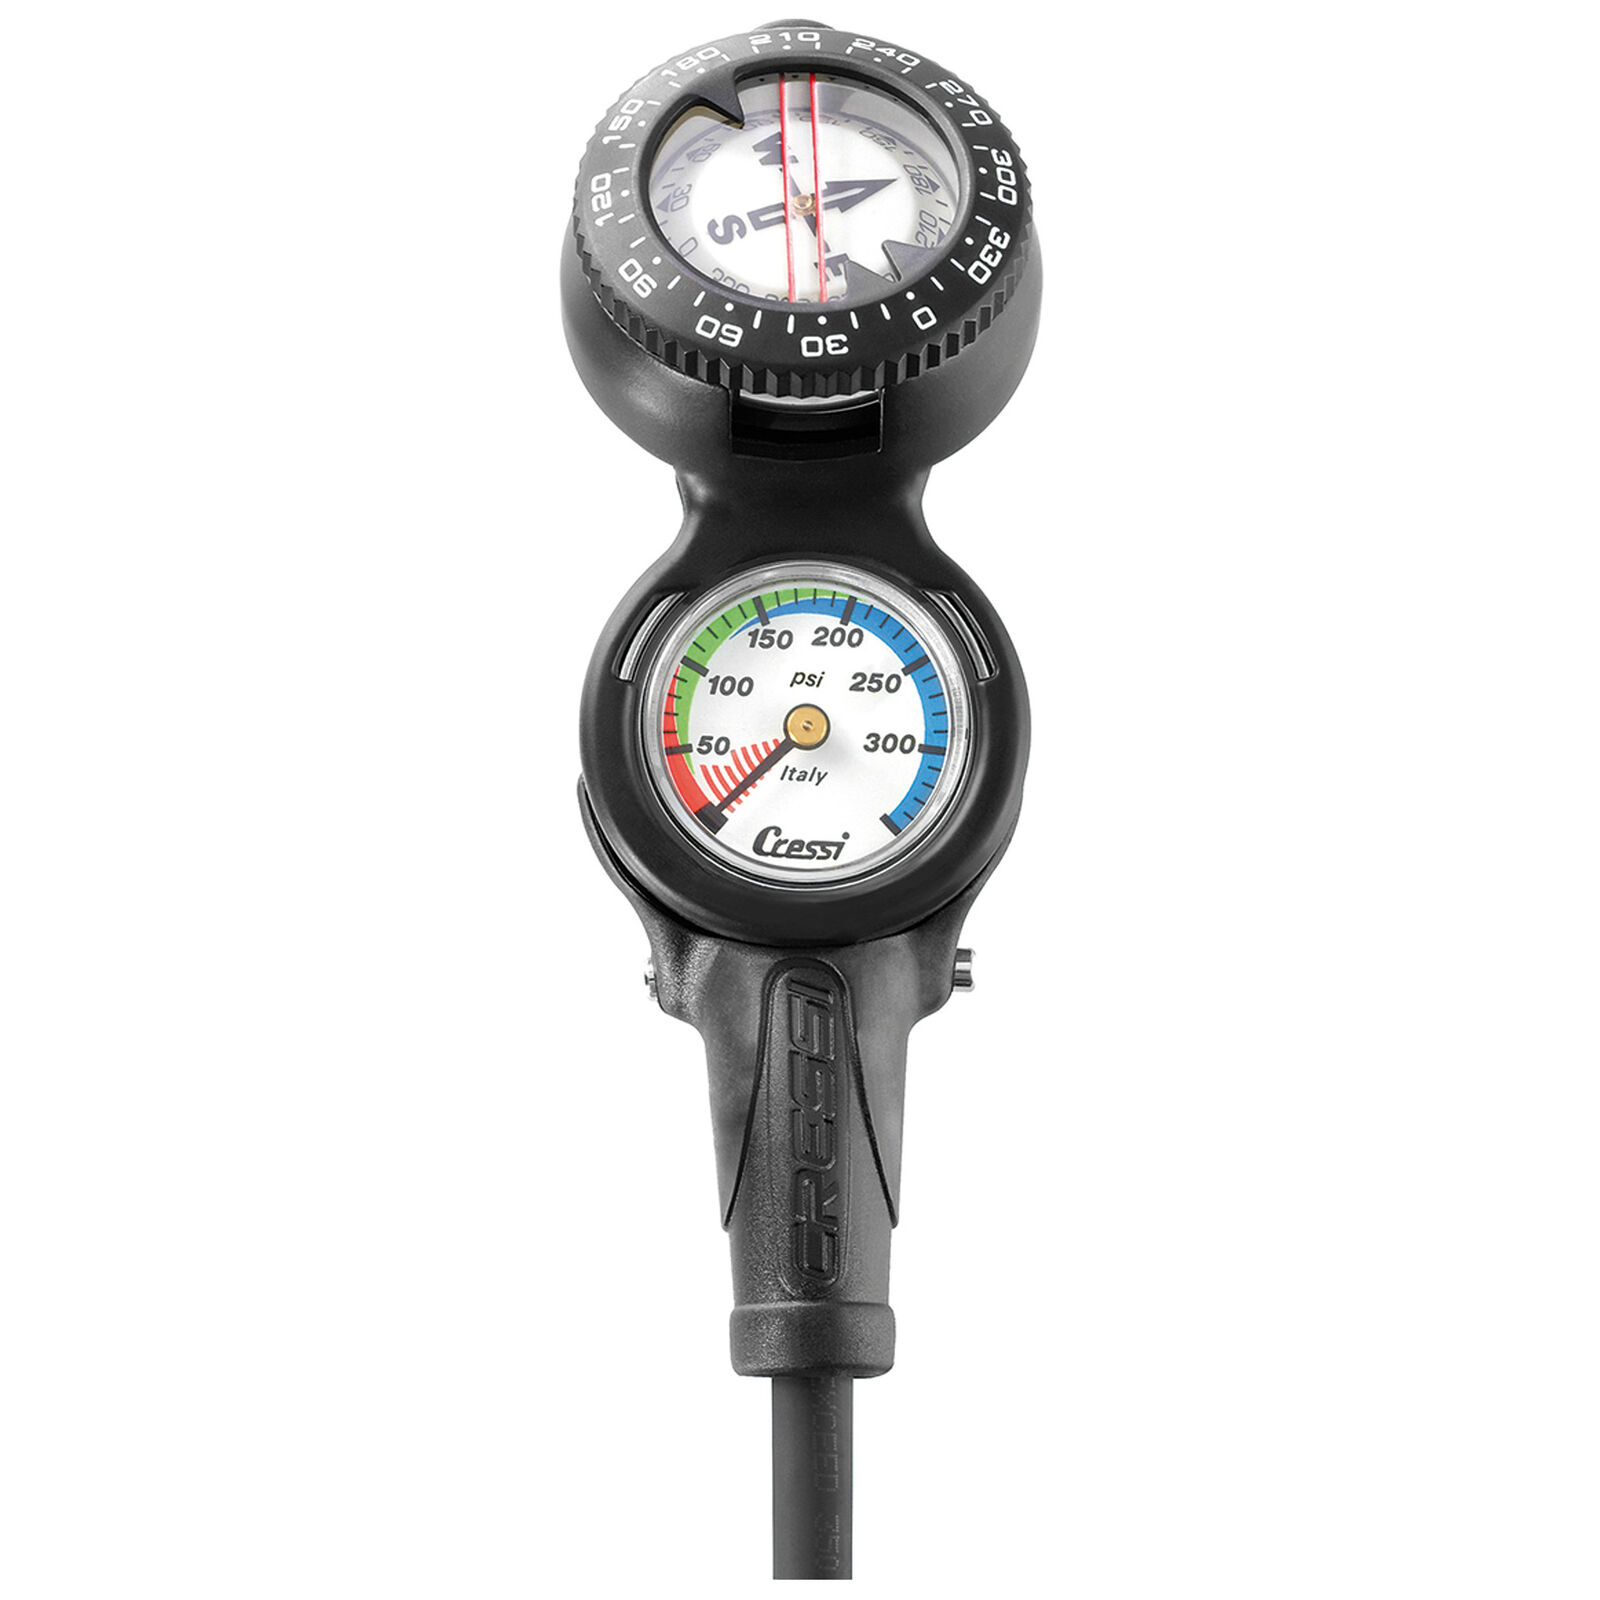 Used Cressi Console CP2 - Pressure Gauge and Compass for Scuba Diving - Imperial